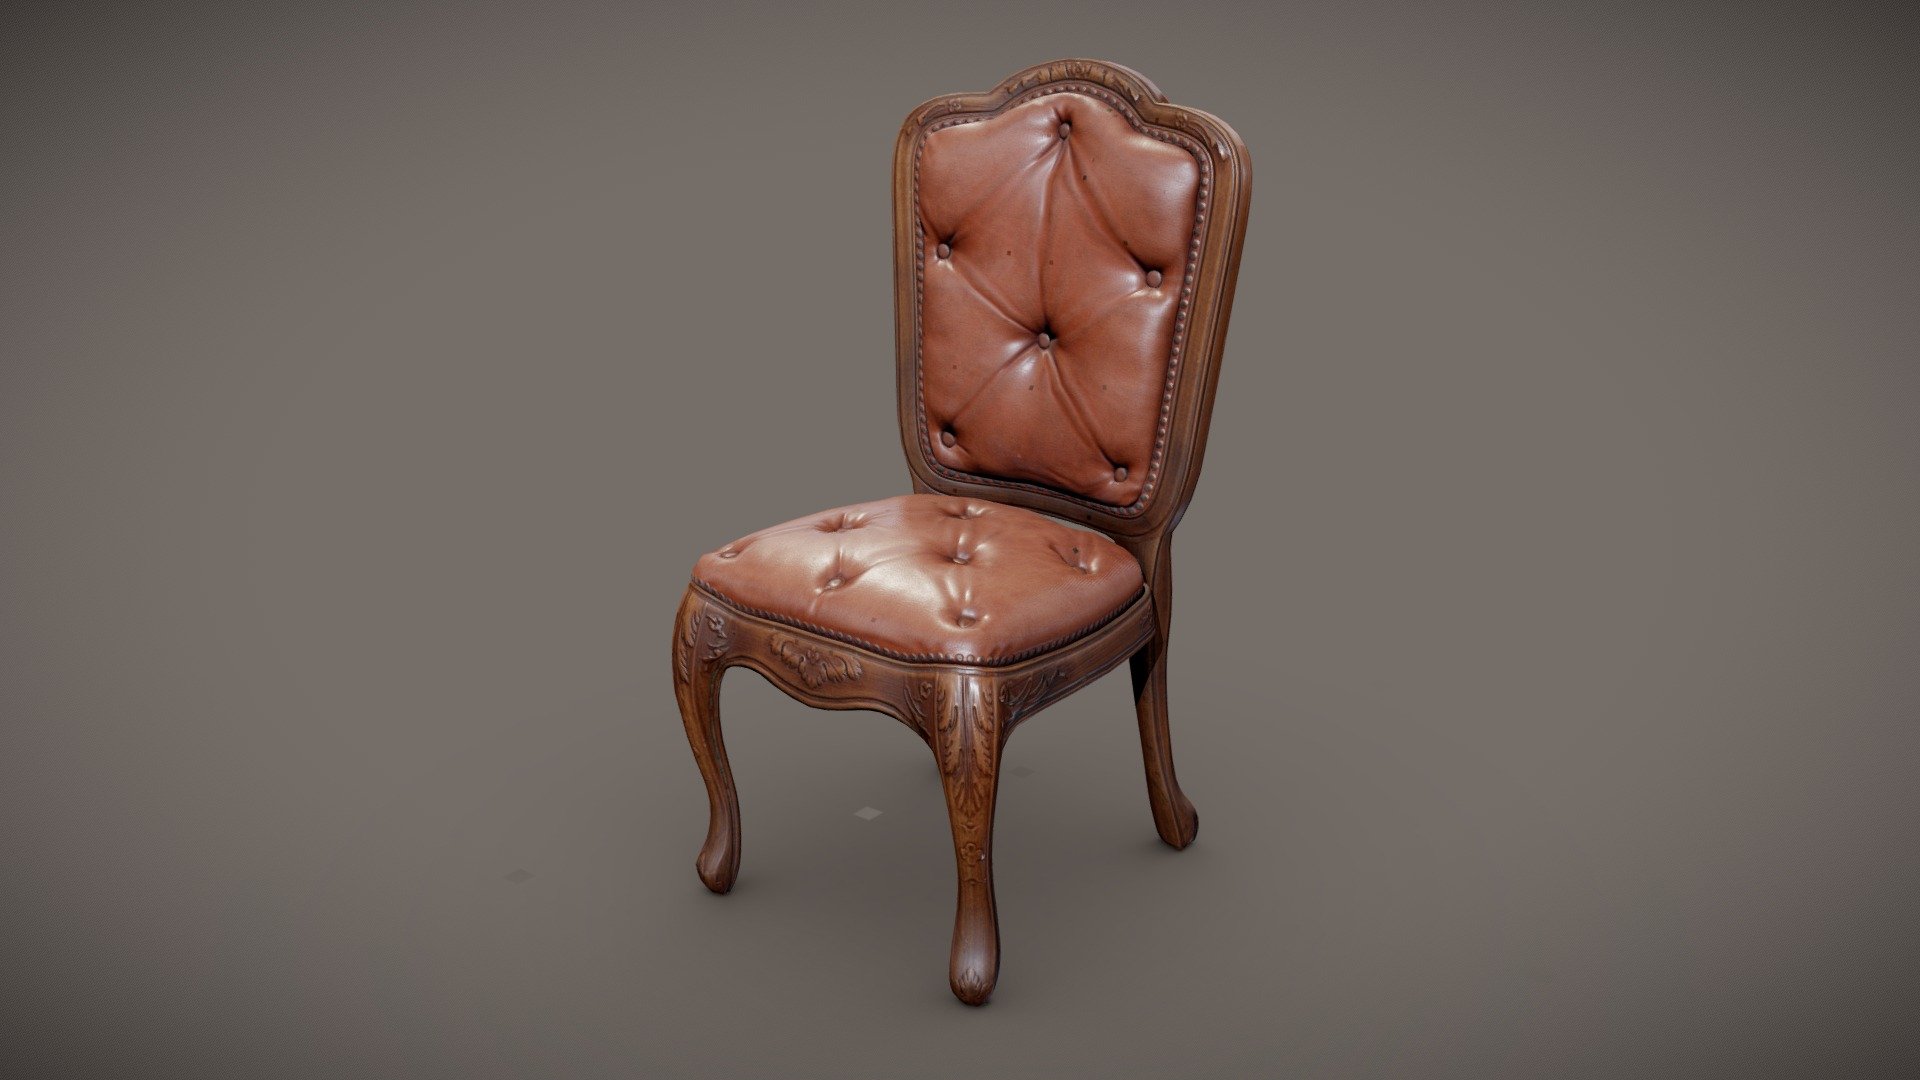 Ornate wooden chair with leather padding 3d model